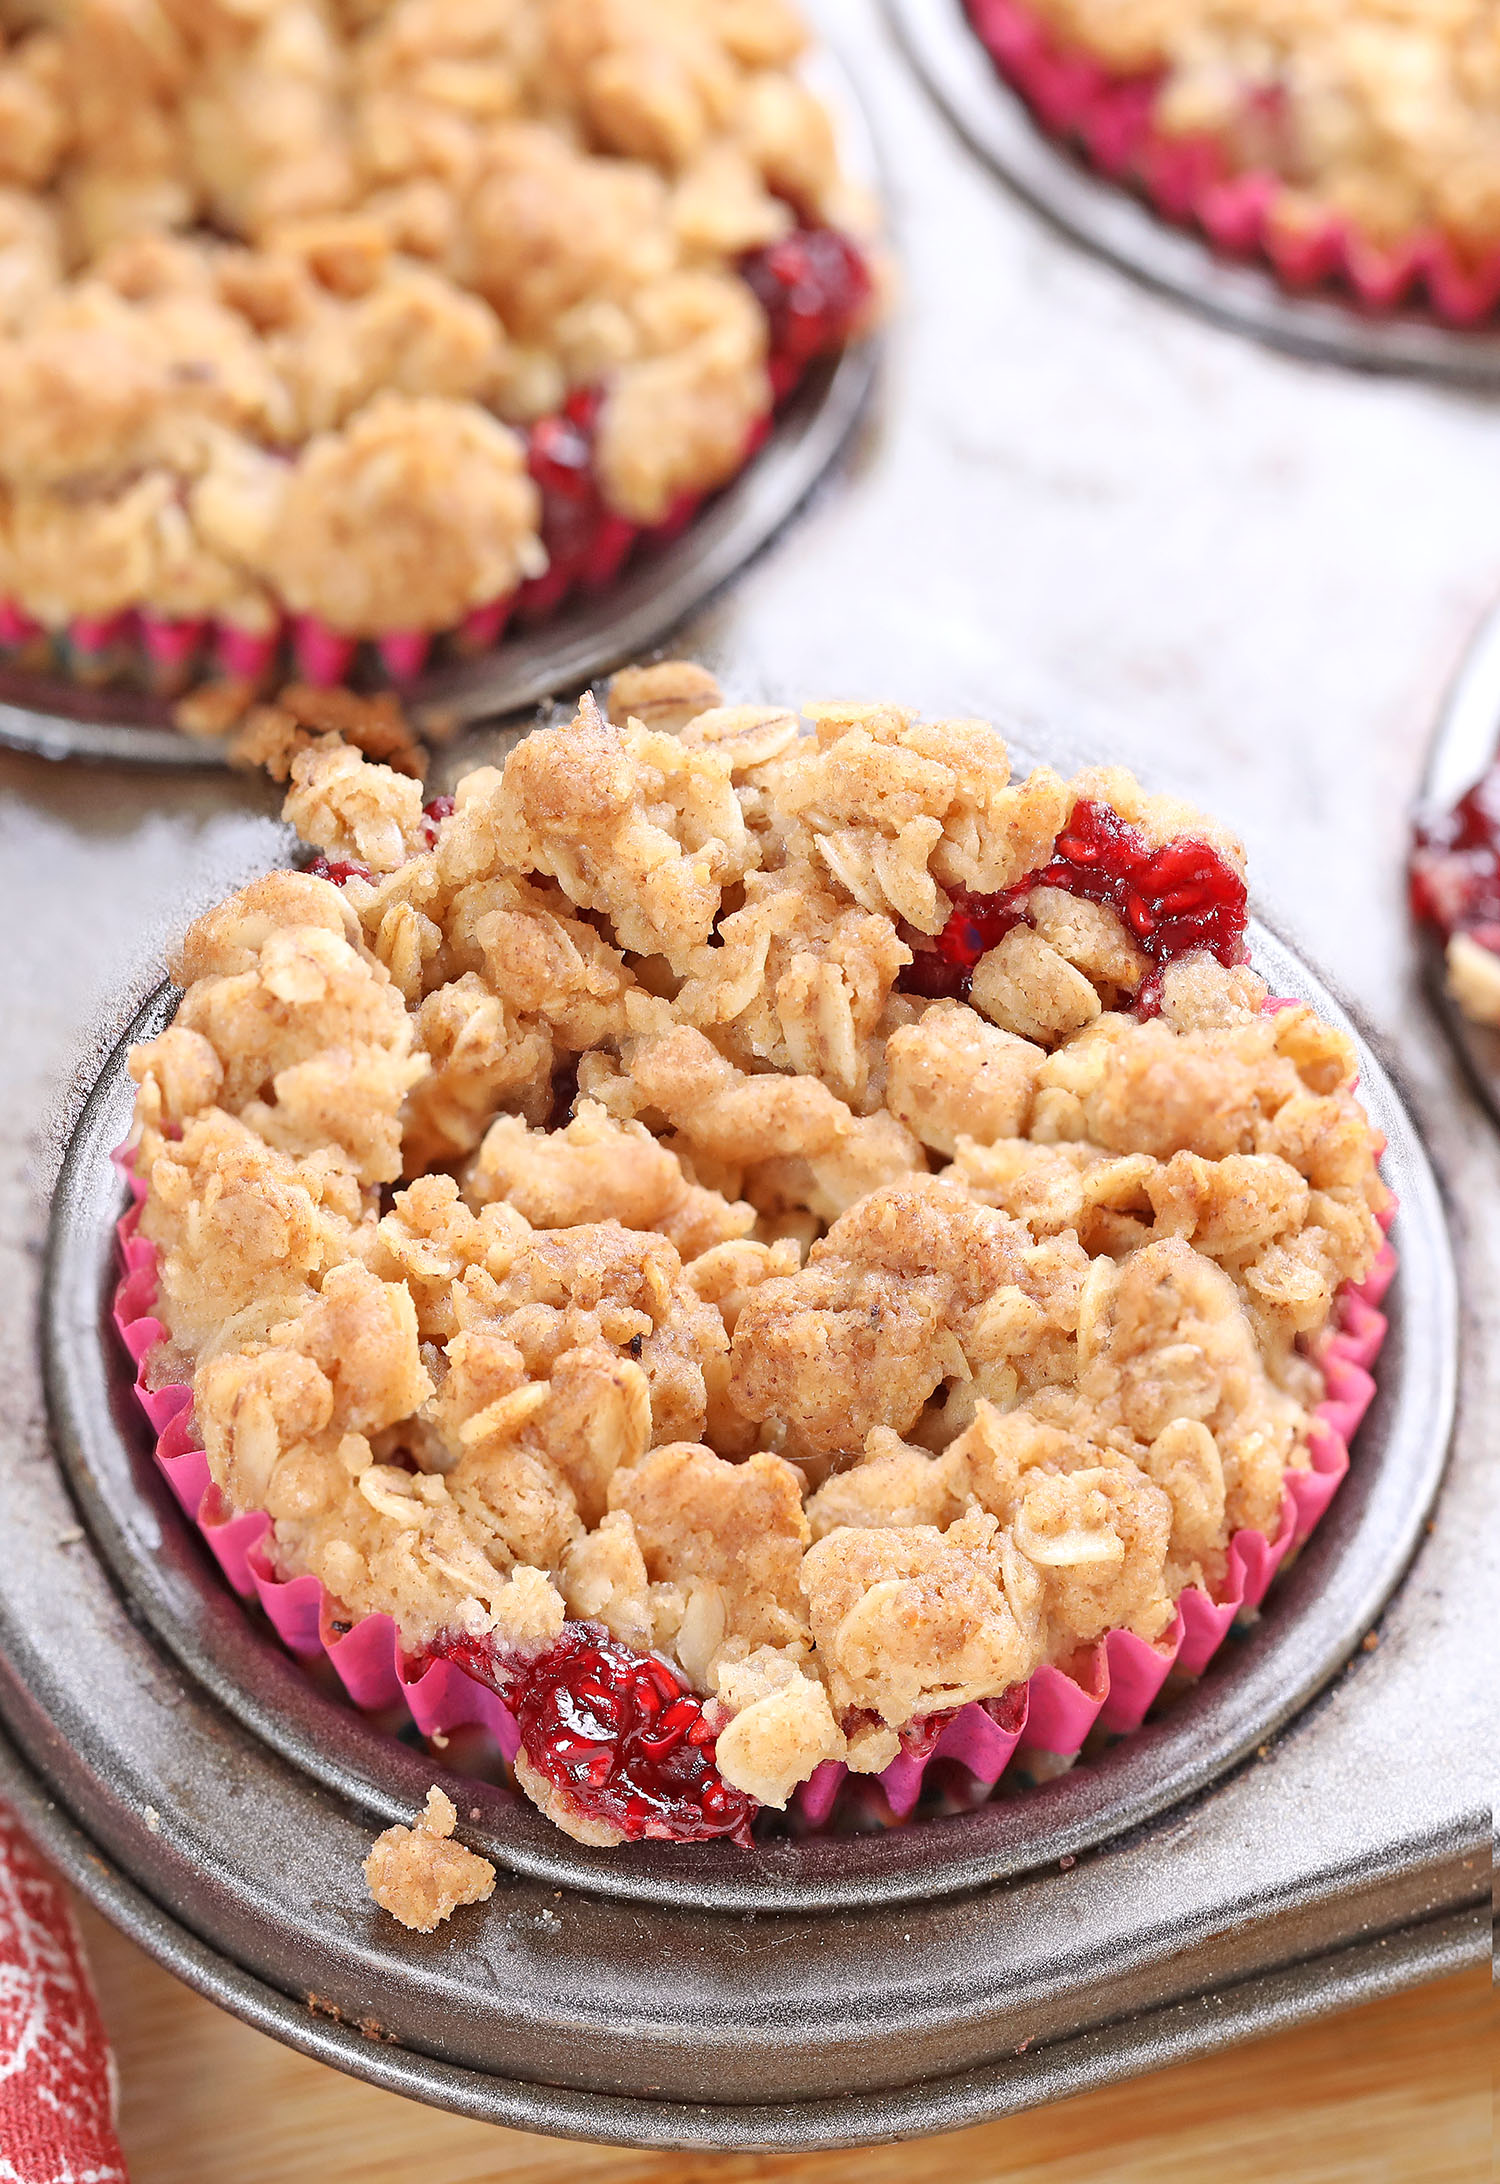 Raspberry Crumble Mini Cheesecake - The BEST easy summer dessert! A layer of a graham cracker crust, creamy cheesecake, juicy, sticky, bubbly raspberries, and topped with a buttery crumble that’s baked to perfection.